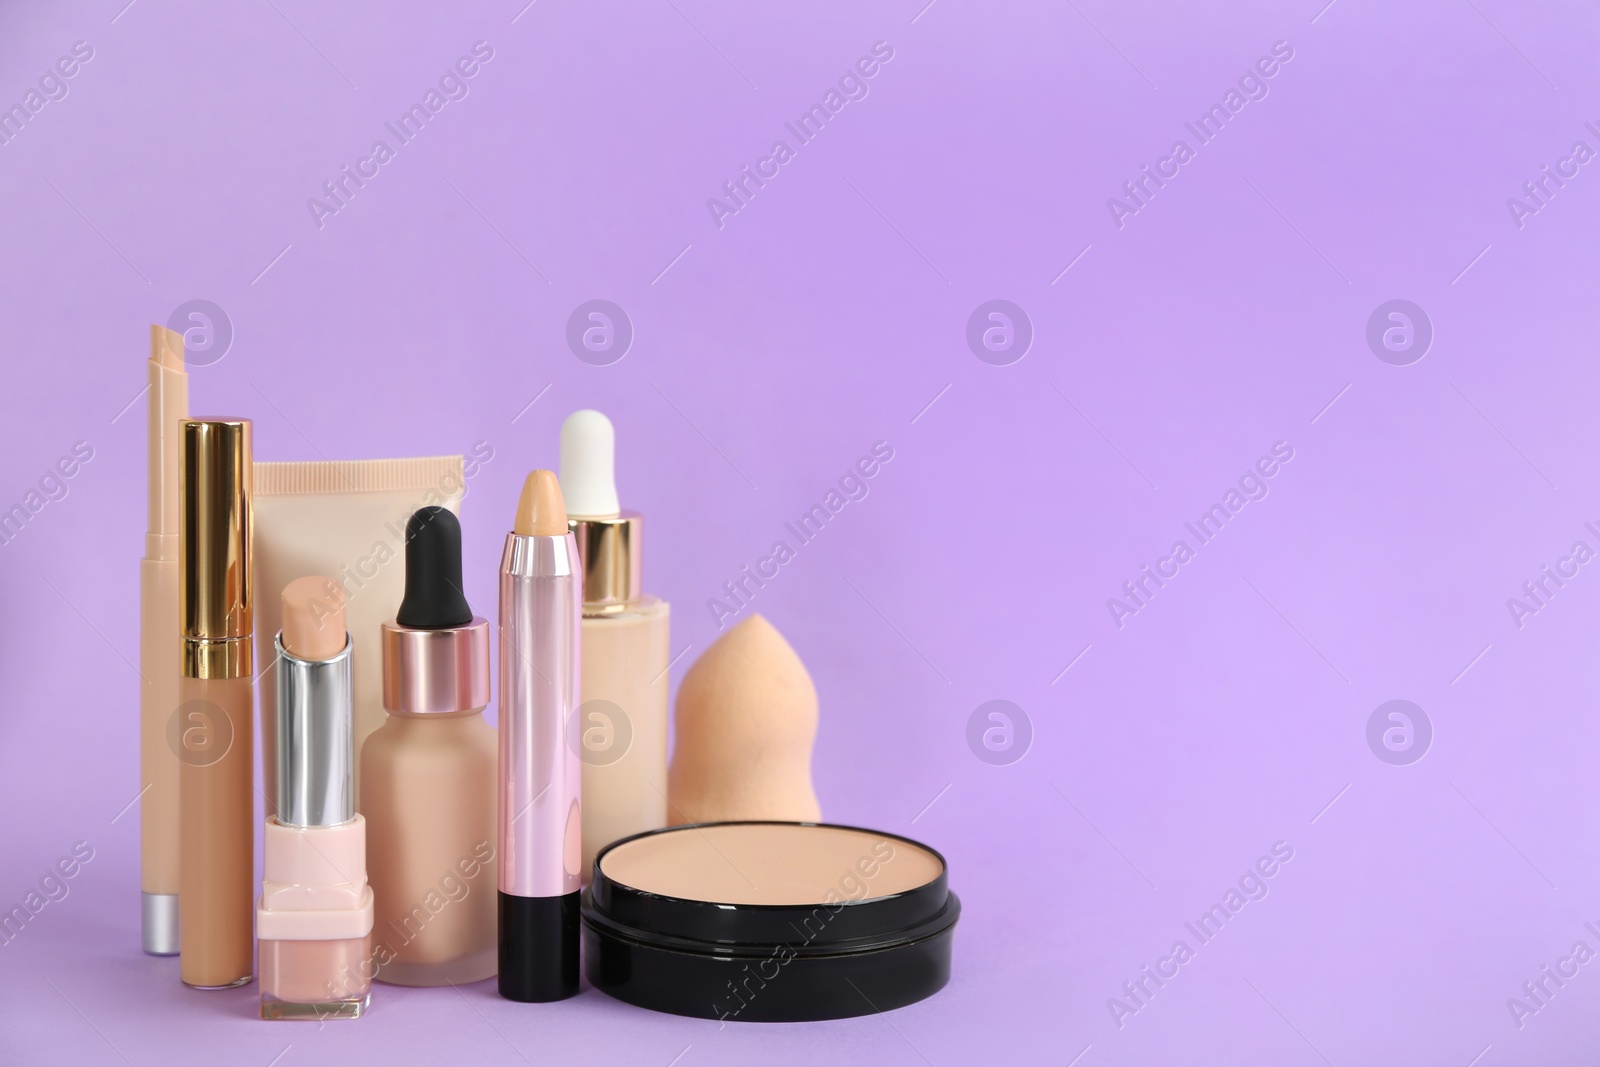 Photo of Foundation makeup products on violet background, space for text. Decorative cosmetics